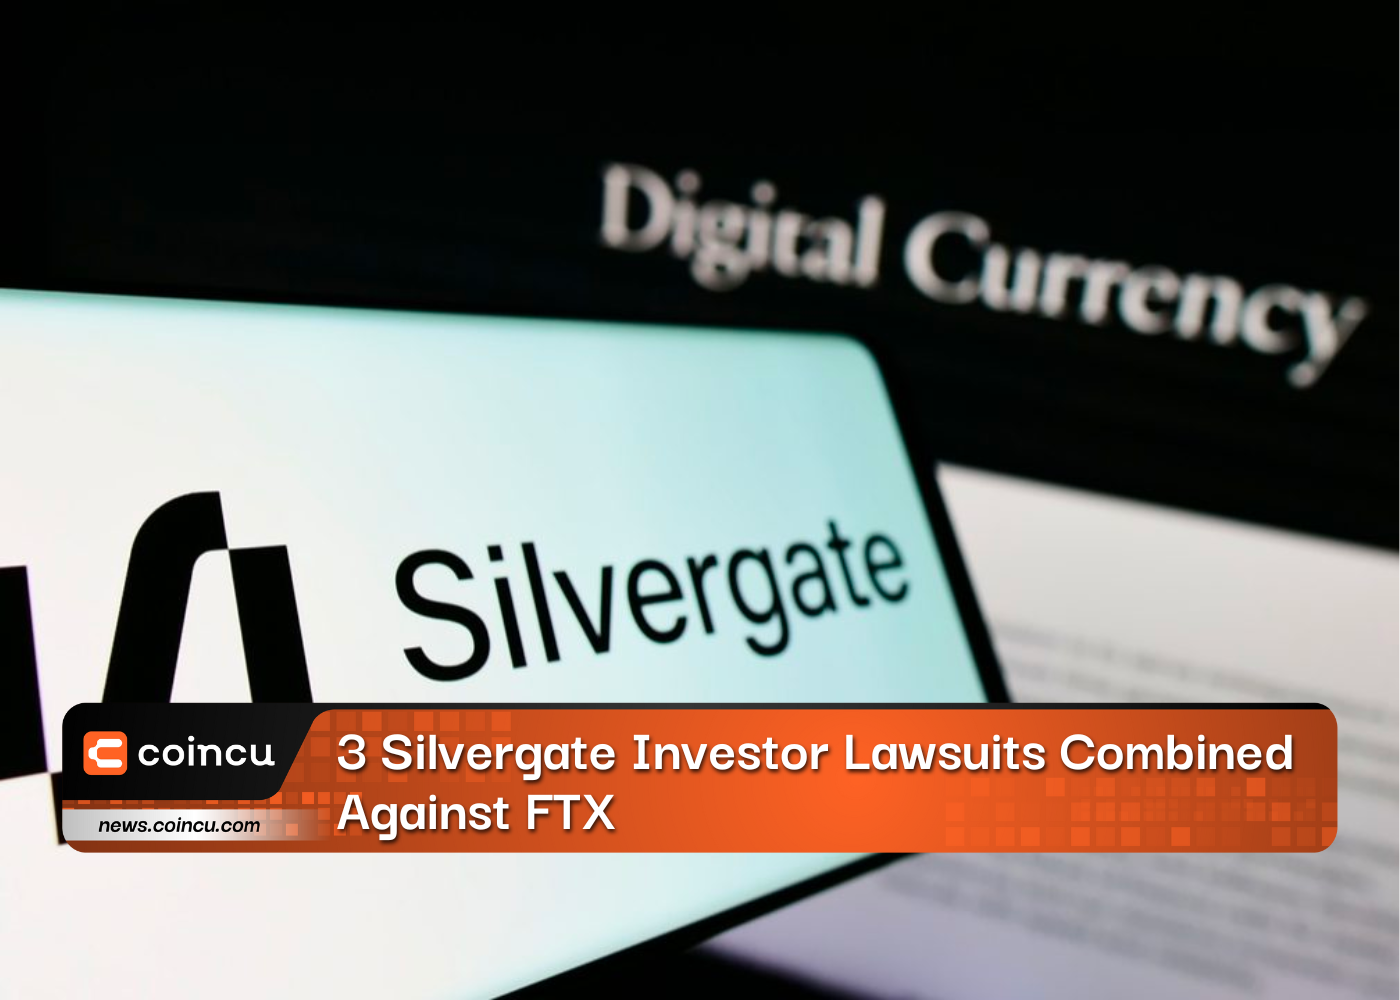 3 Silvergate Investor Lawsuits Combined Against FTX